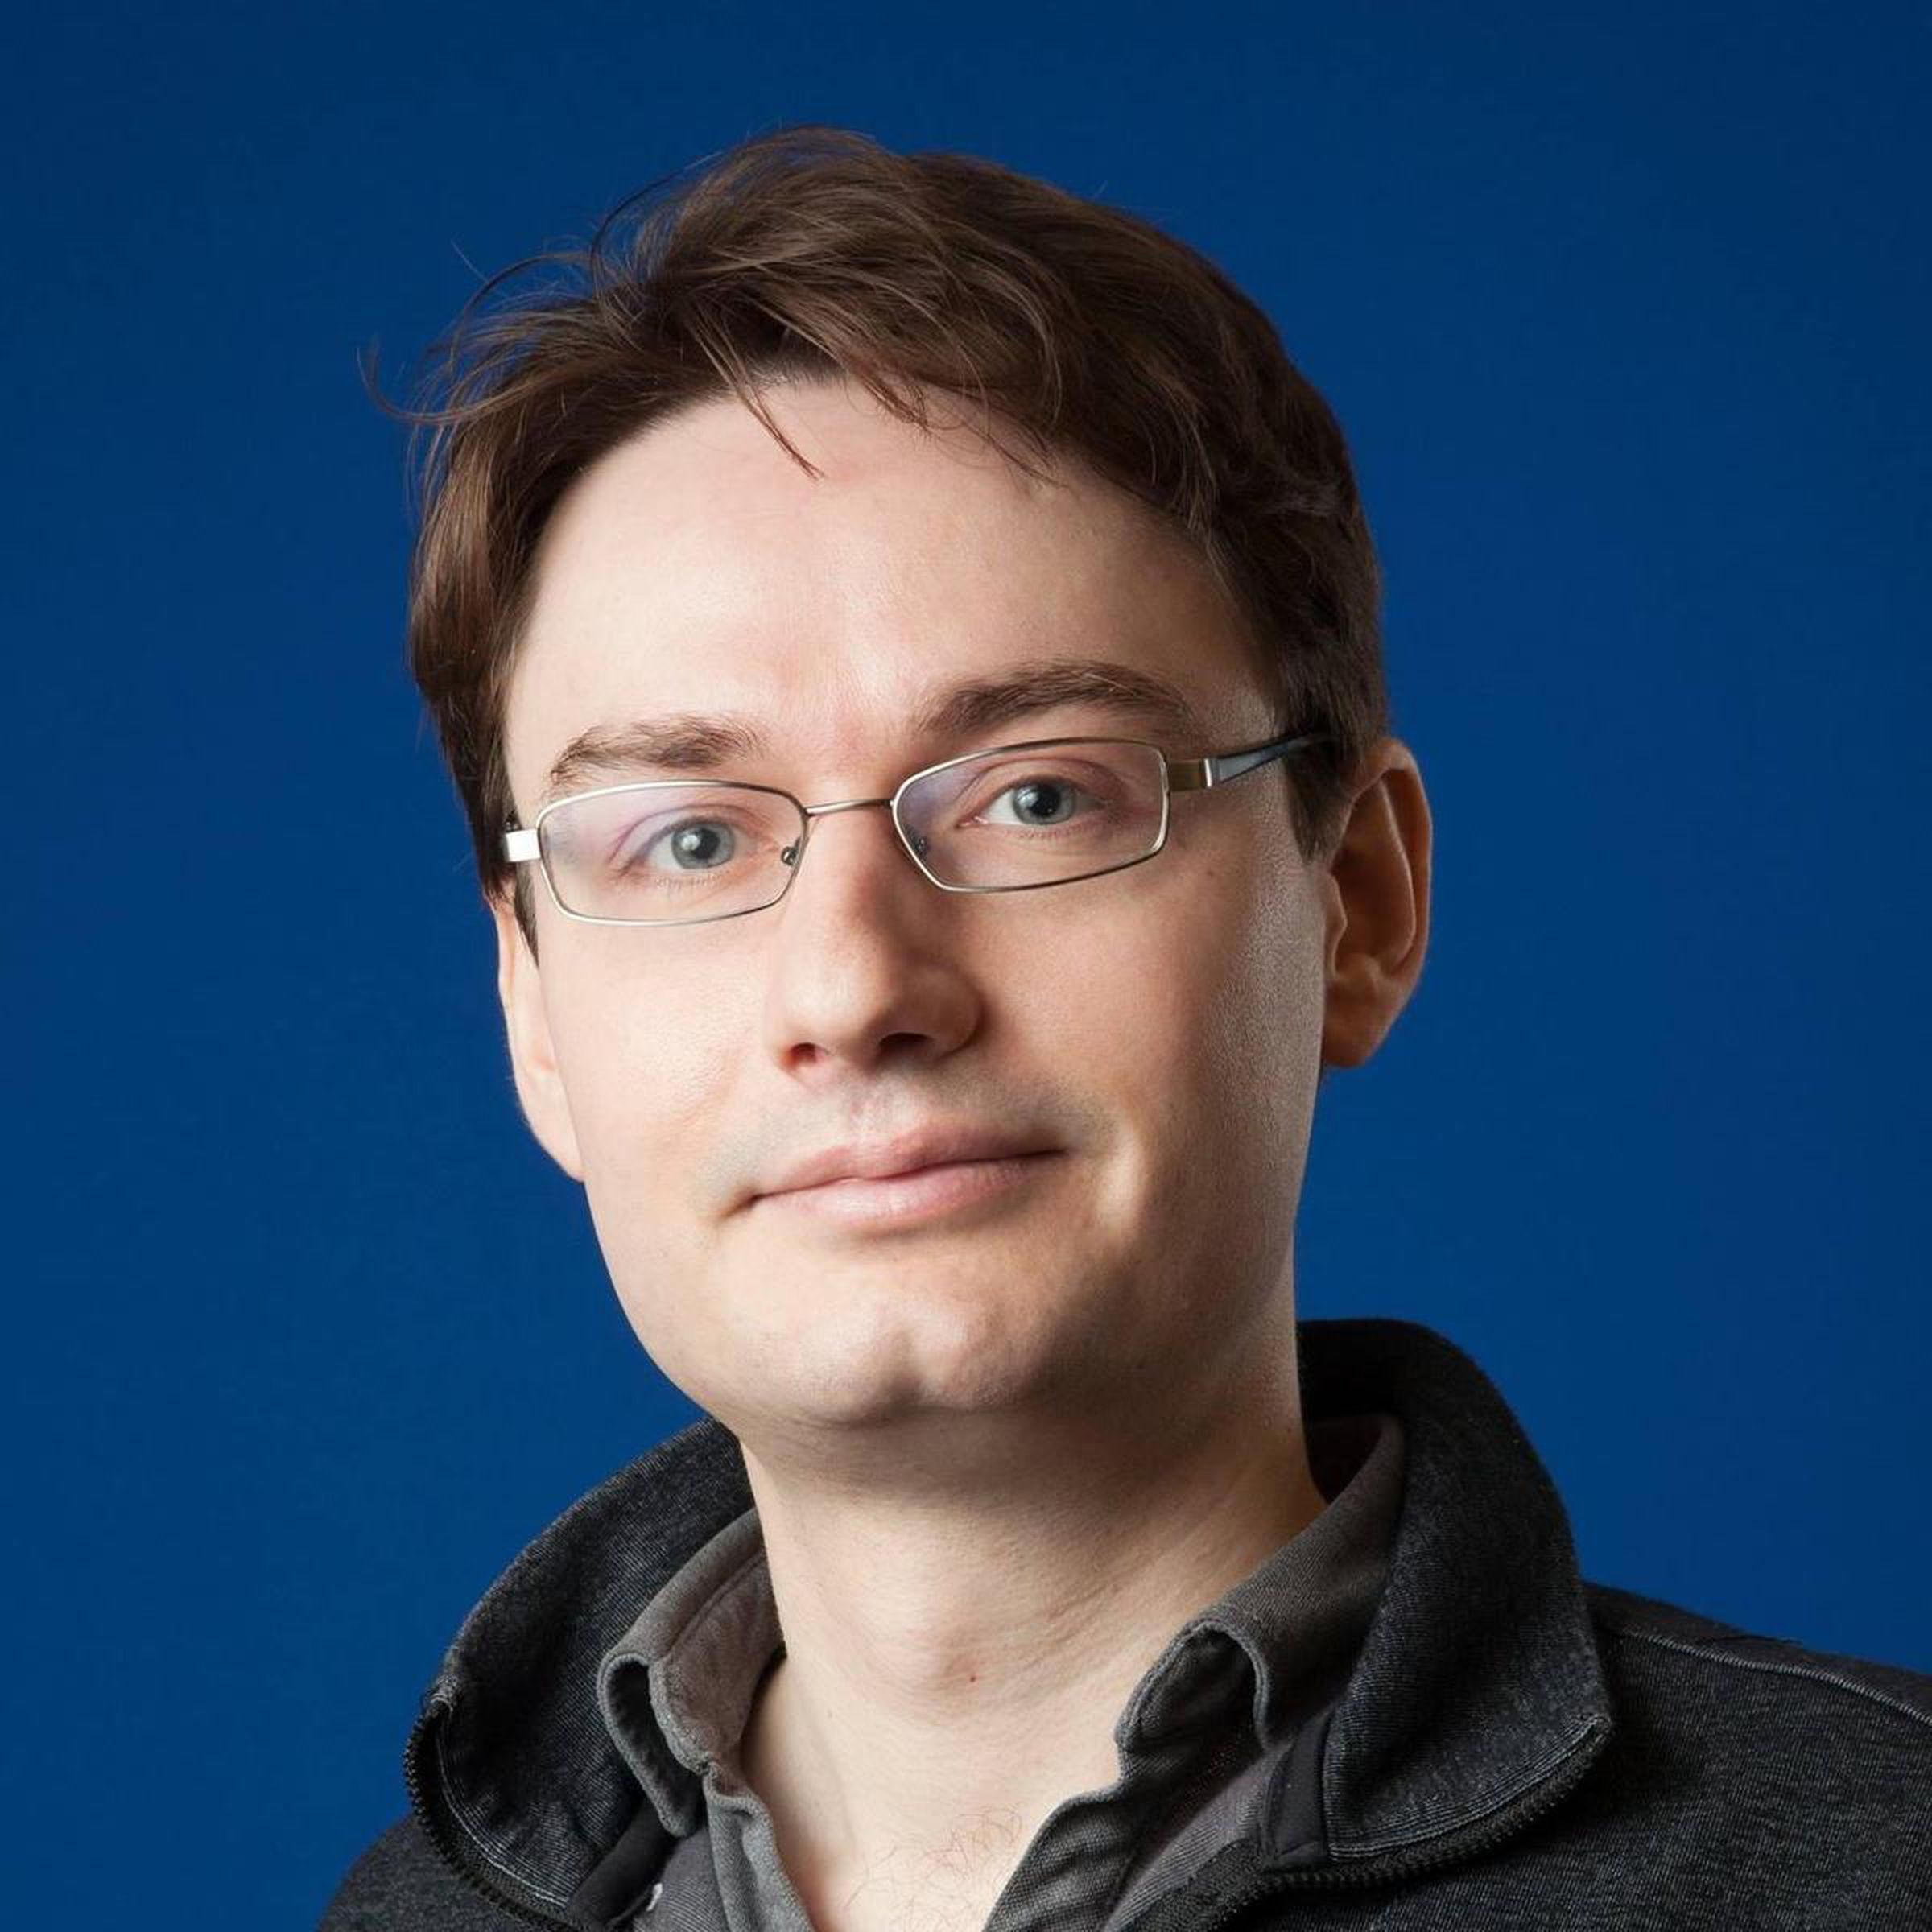 François Chollet is the inventor of AI framework Keras and a software engineer at Google.